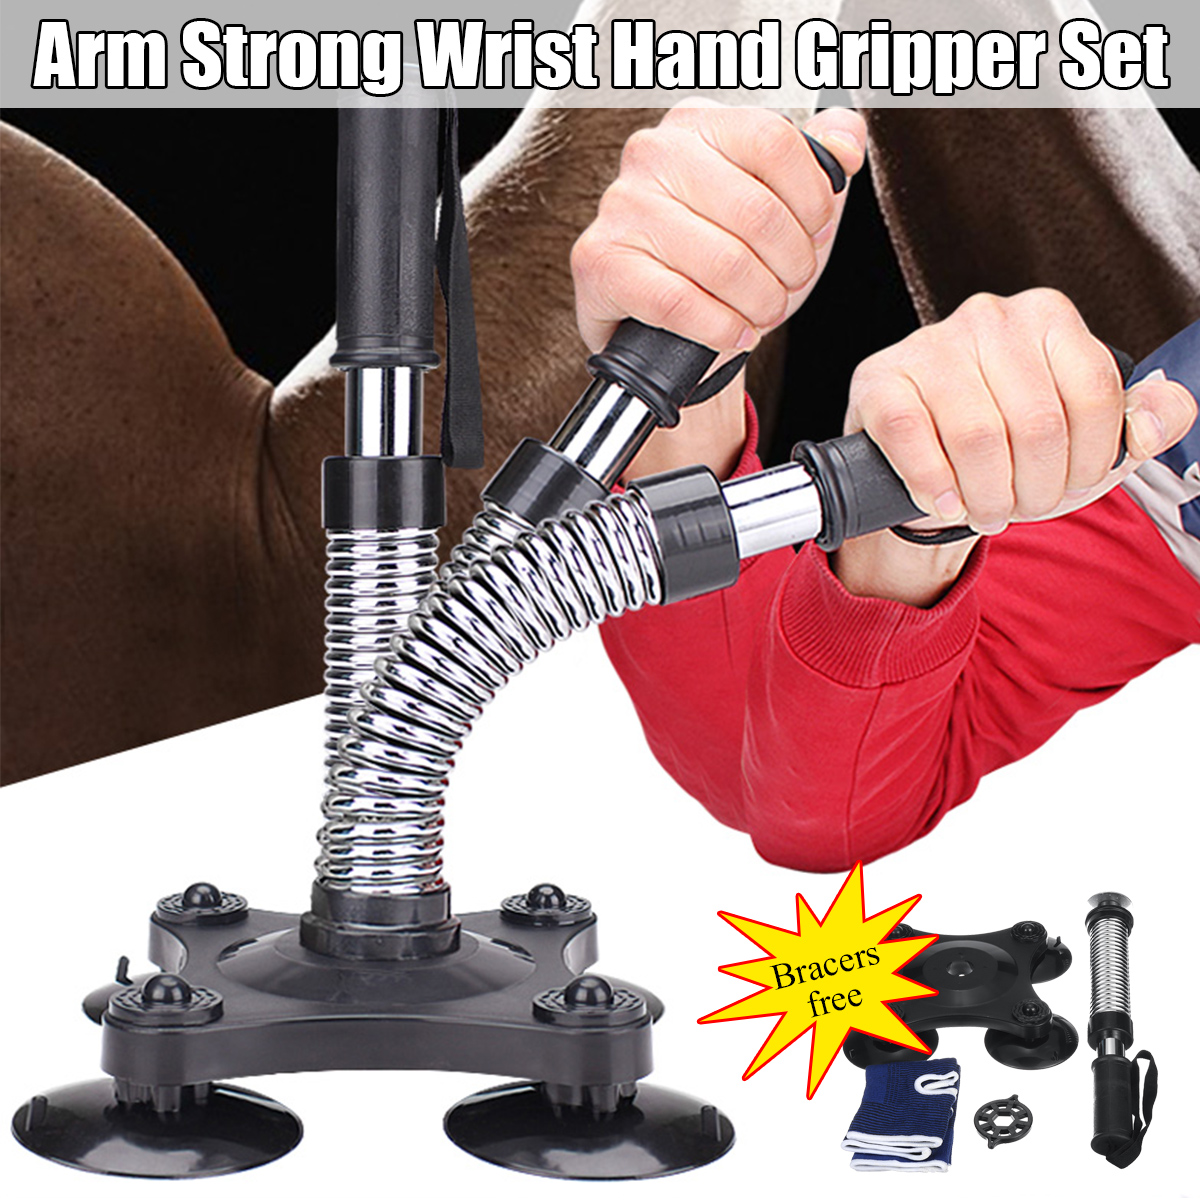 HeavyLight-Arm-Strong-Wrist-Hand-Gripper-Home-Fitness-Exercise-Tools-W-Bracers-1731340-1